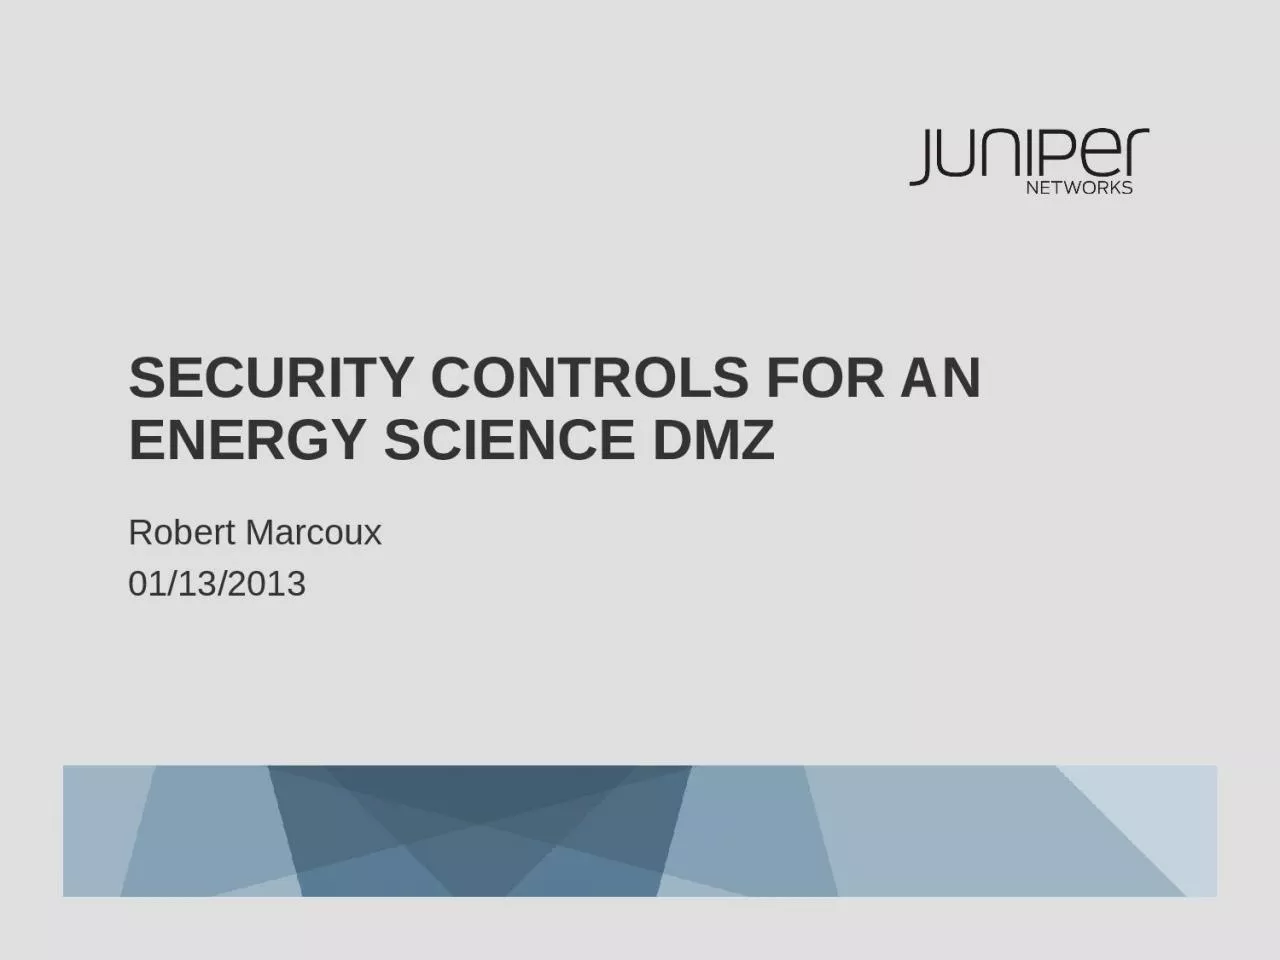 Security Controls For an Energy Science DMZ